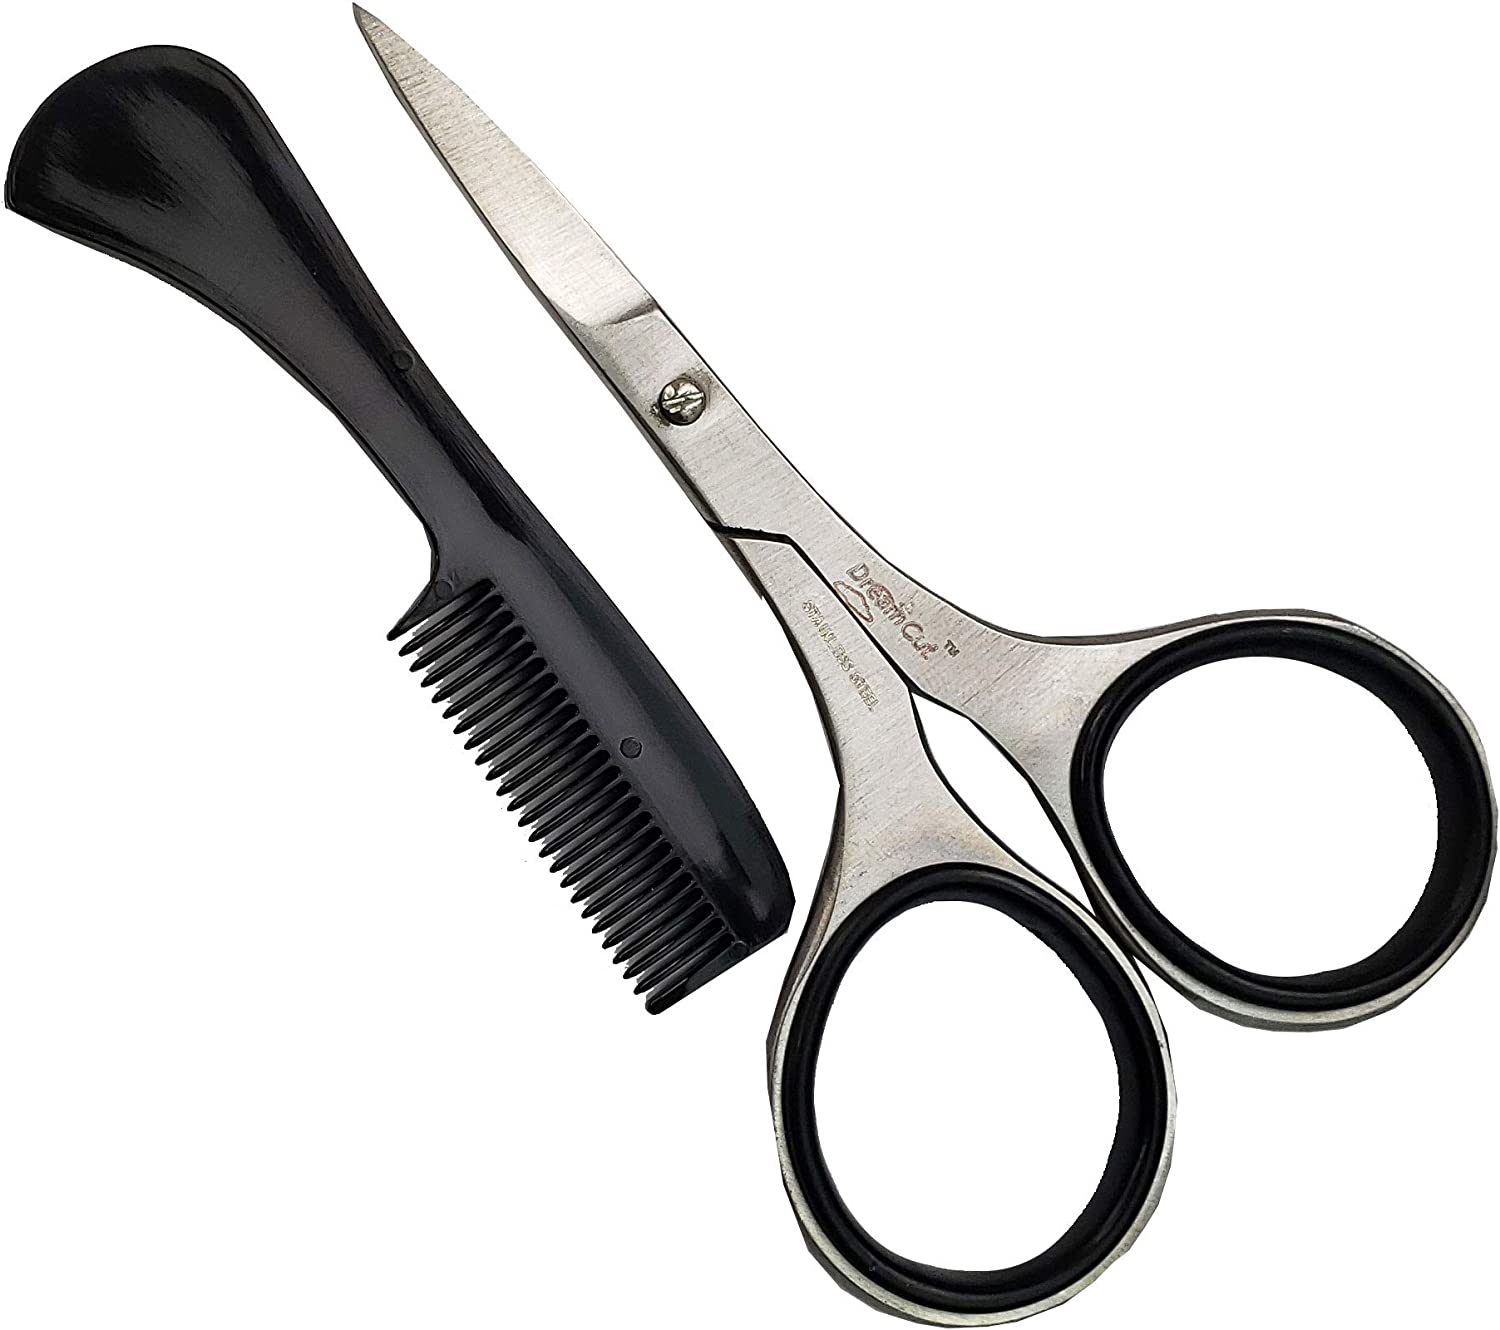 Professional Stainless Steel Sharp Beard & Mustache Scissors with Comb